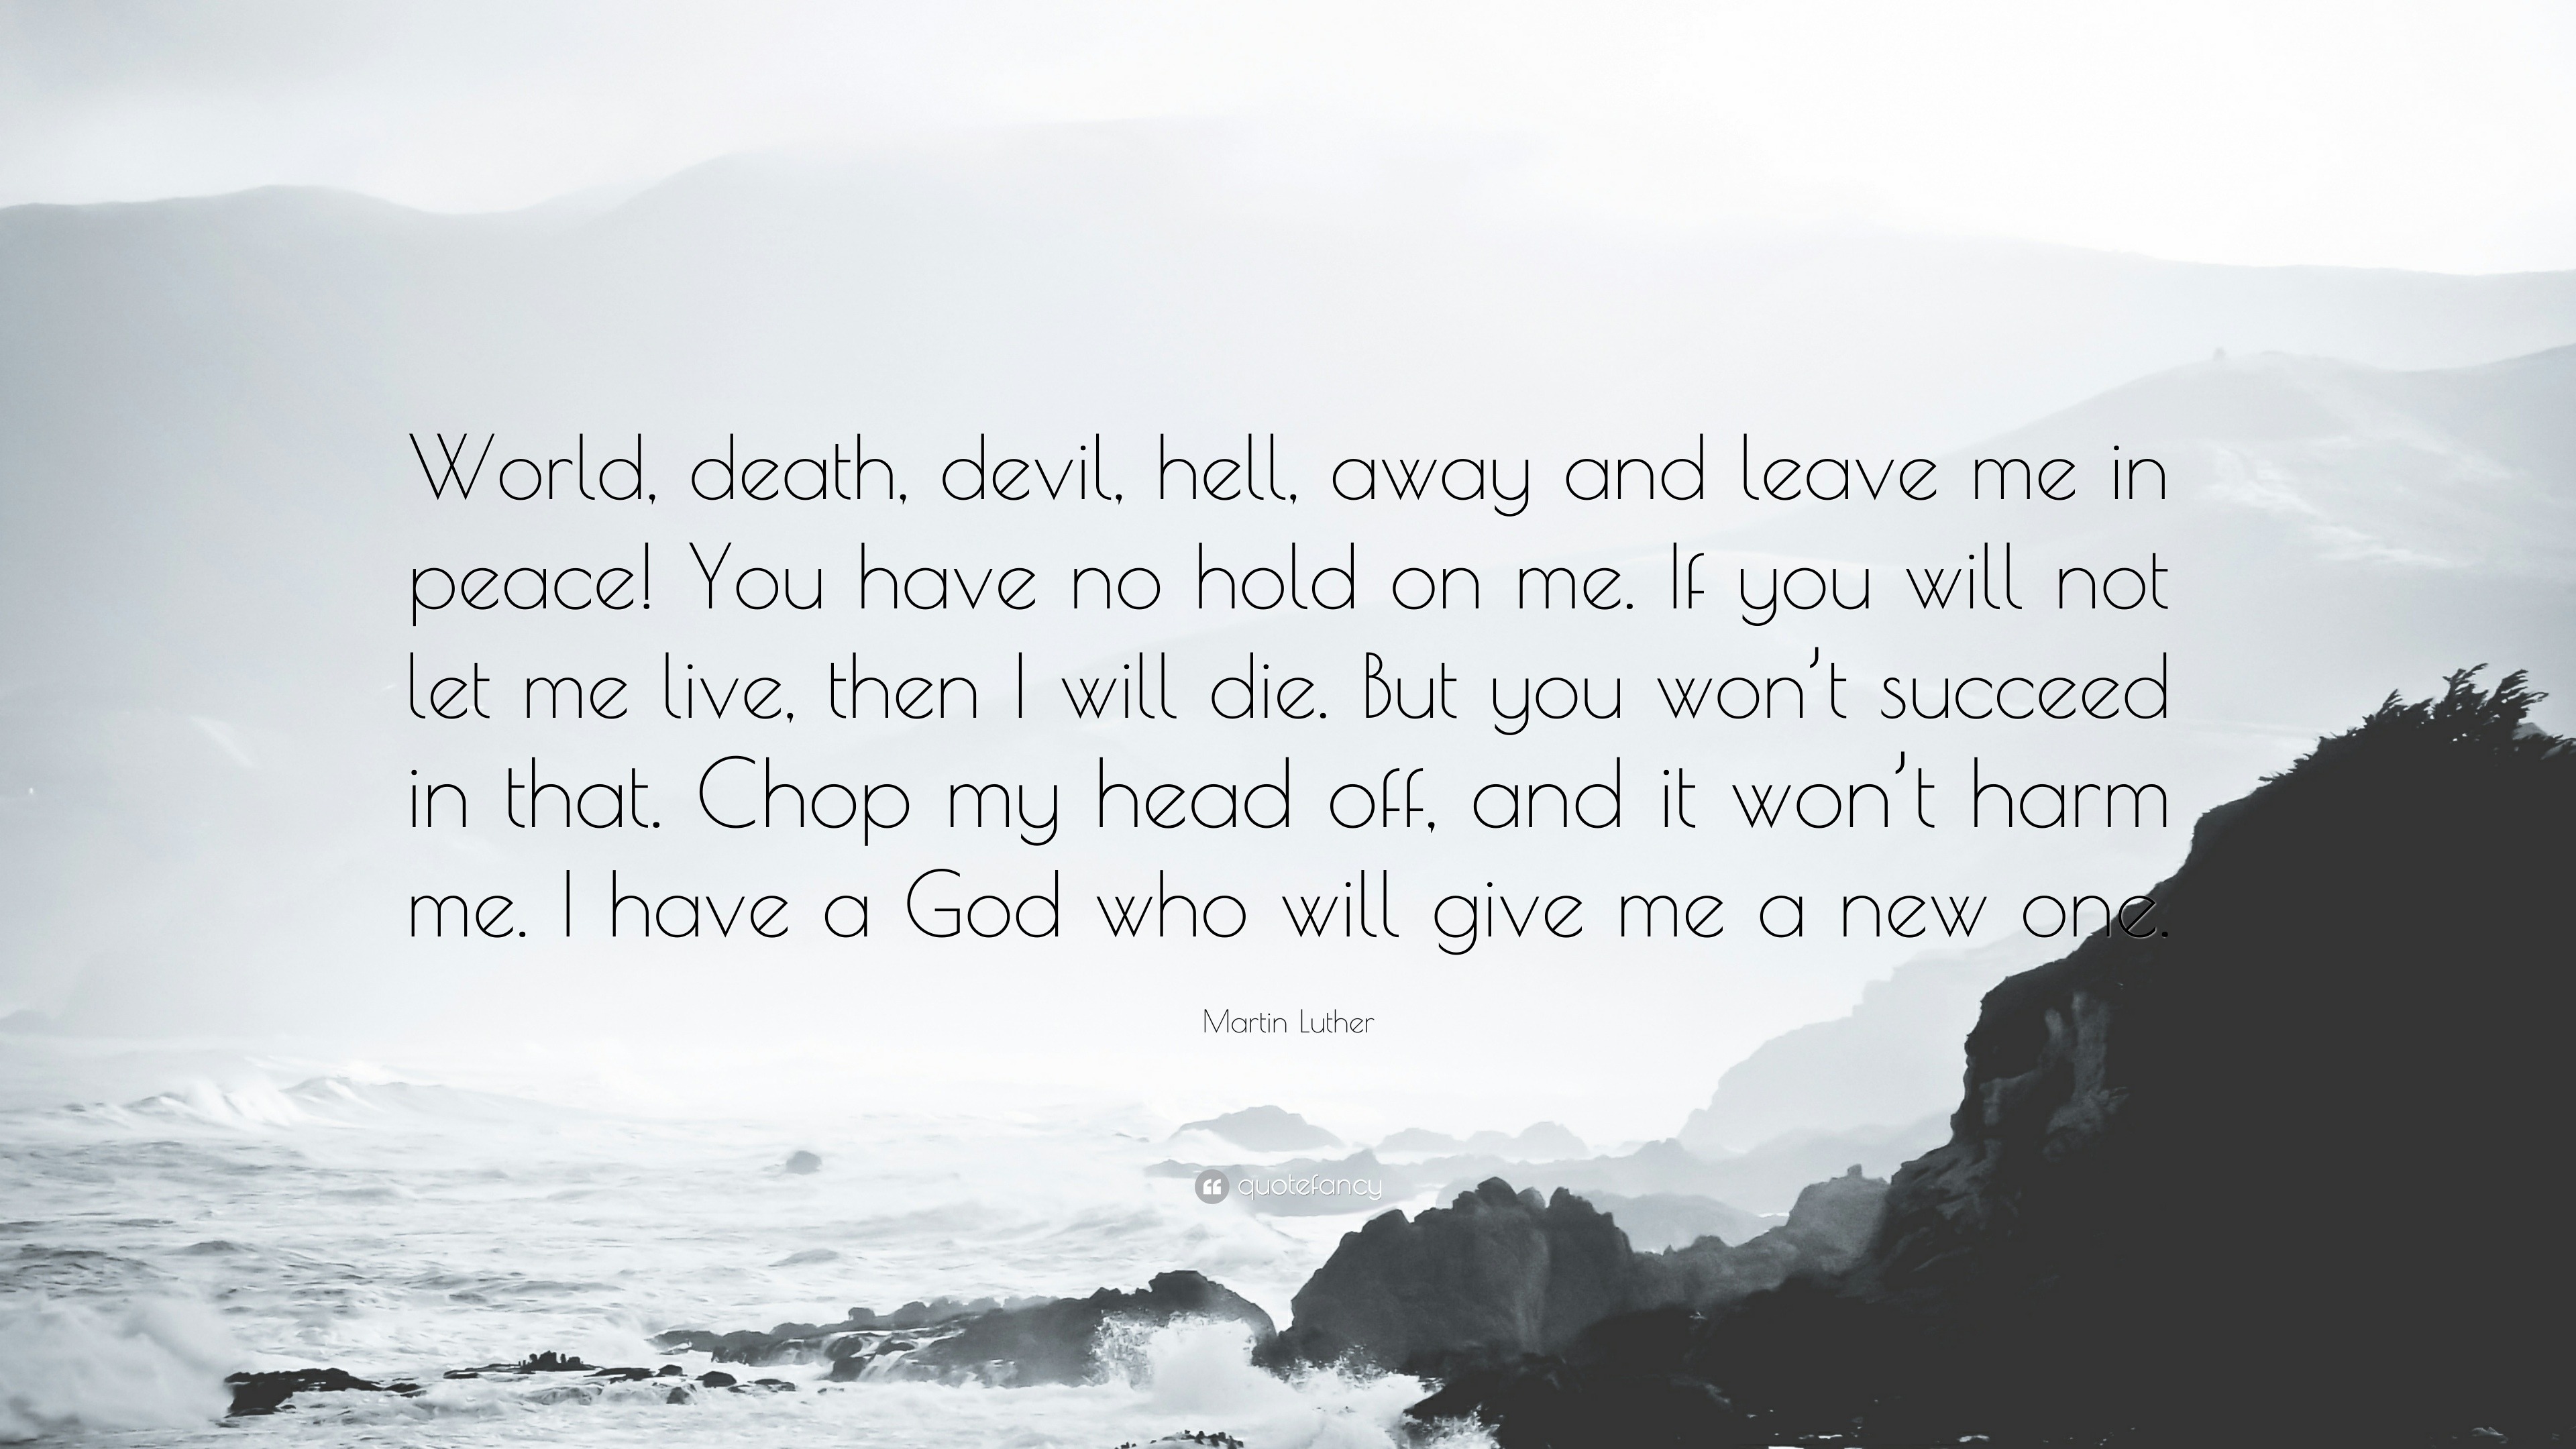 Martin Luther Quote: “World, Death, Devil, Hell, Away And Leave Me In Peace! You Have No Hold On Me. If You Will Not Let Me Live, Then I Will ...”